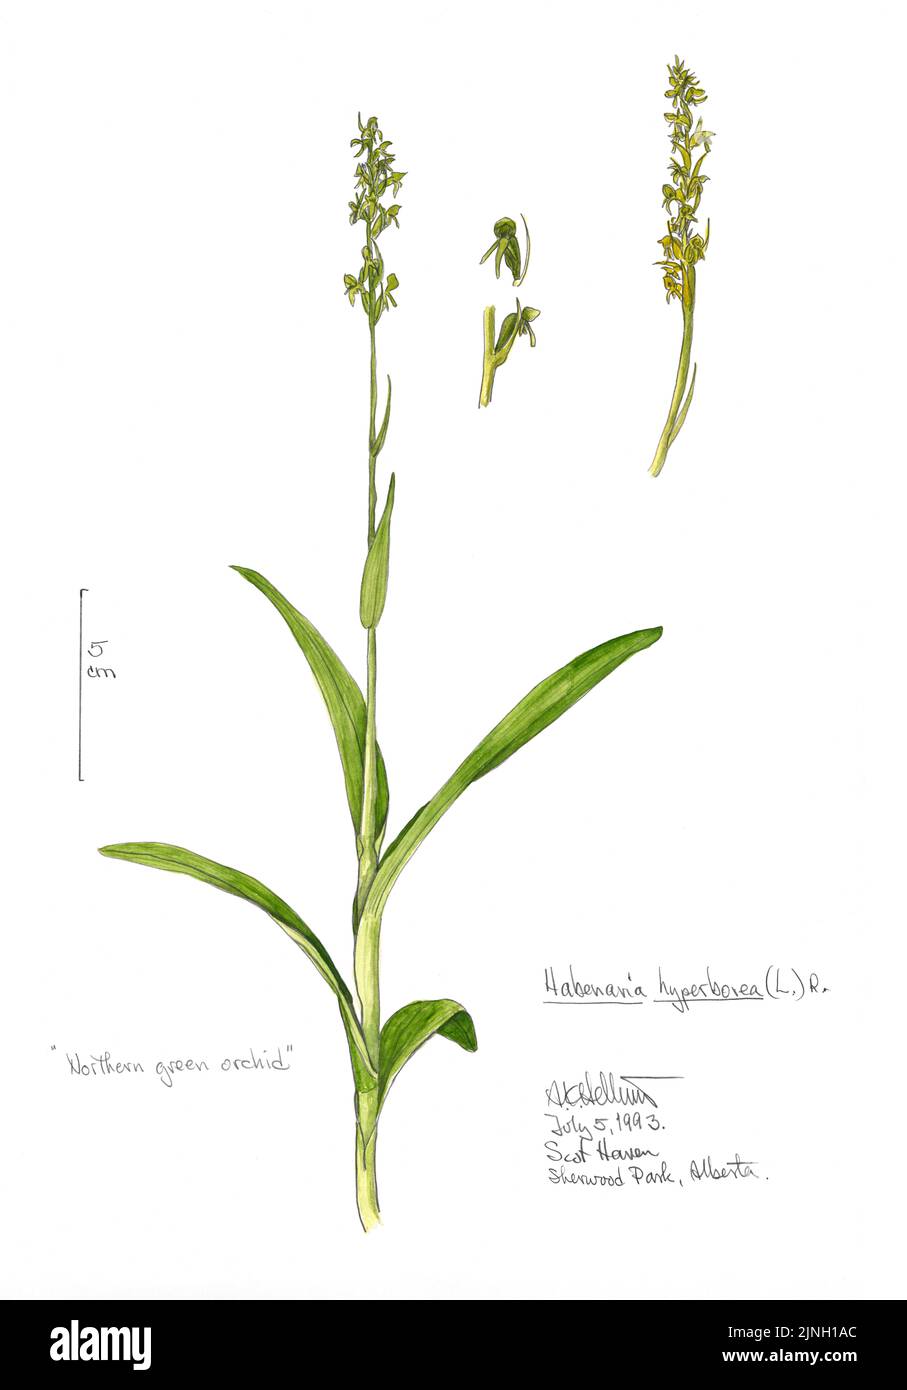 'Northern green orchid' Habenaria hyperborea painted by A. Kåre Hellum at Sherwood Park, AB July 05, 1993 Stock Photo